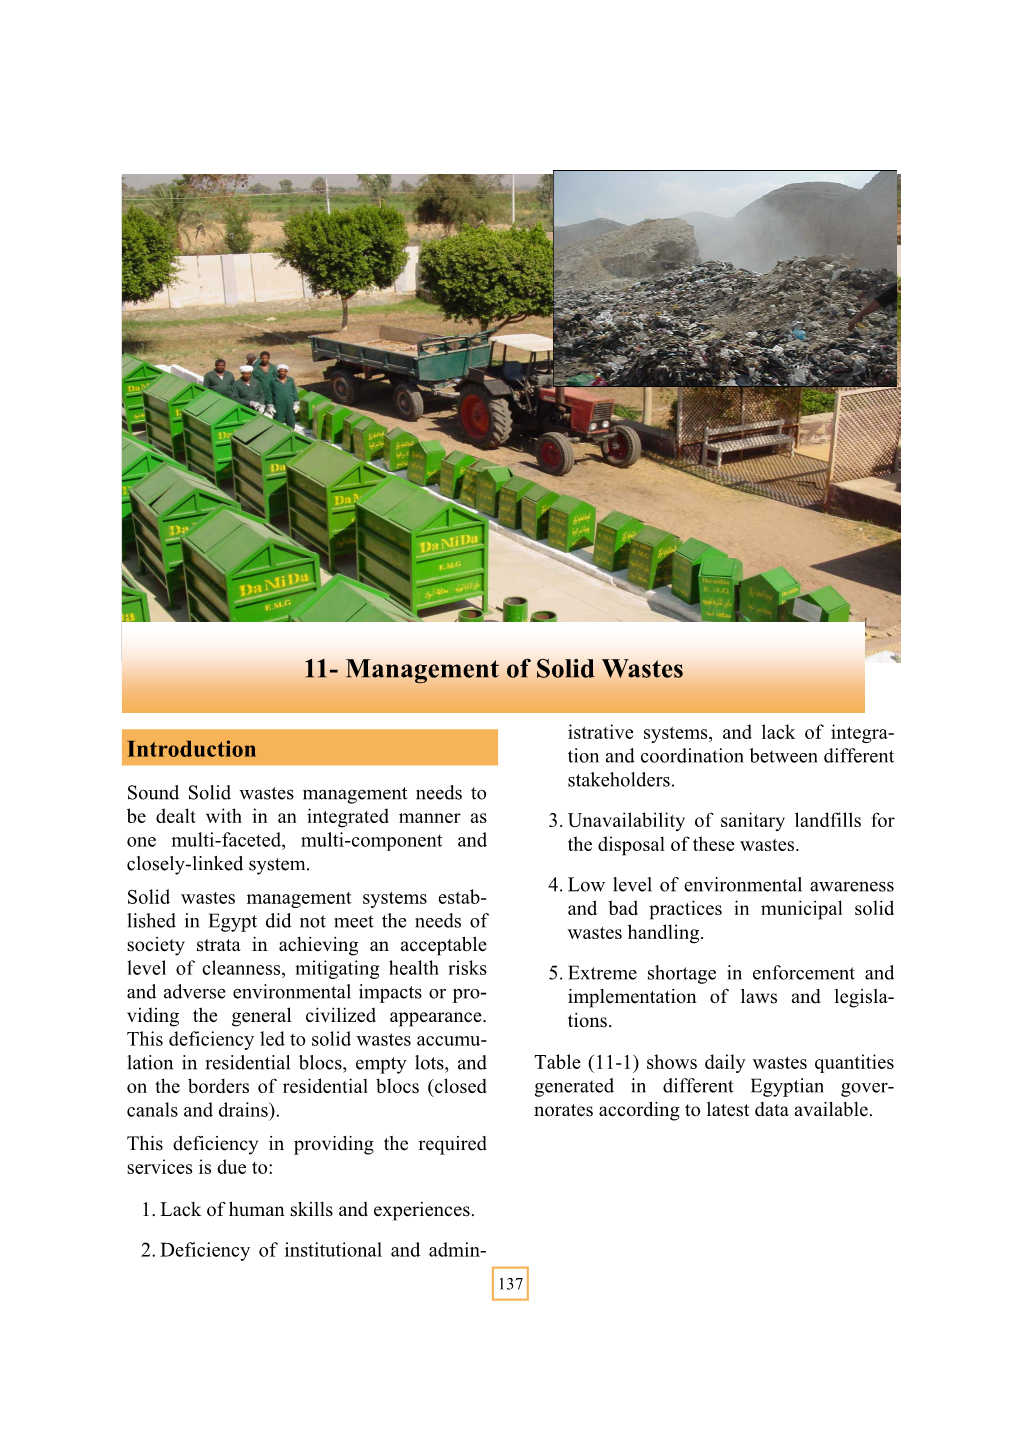 11- Management of Solid Wastes